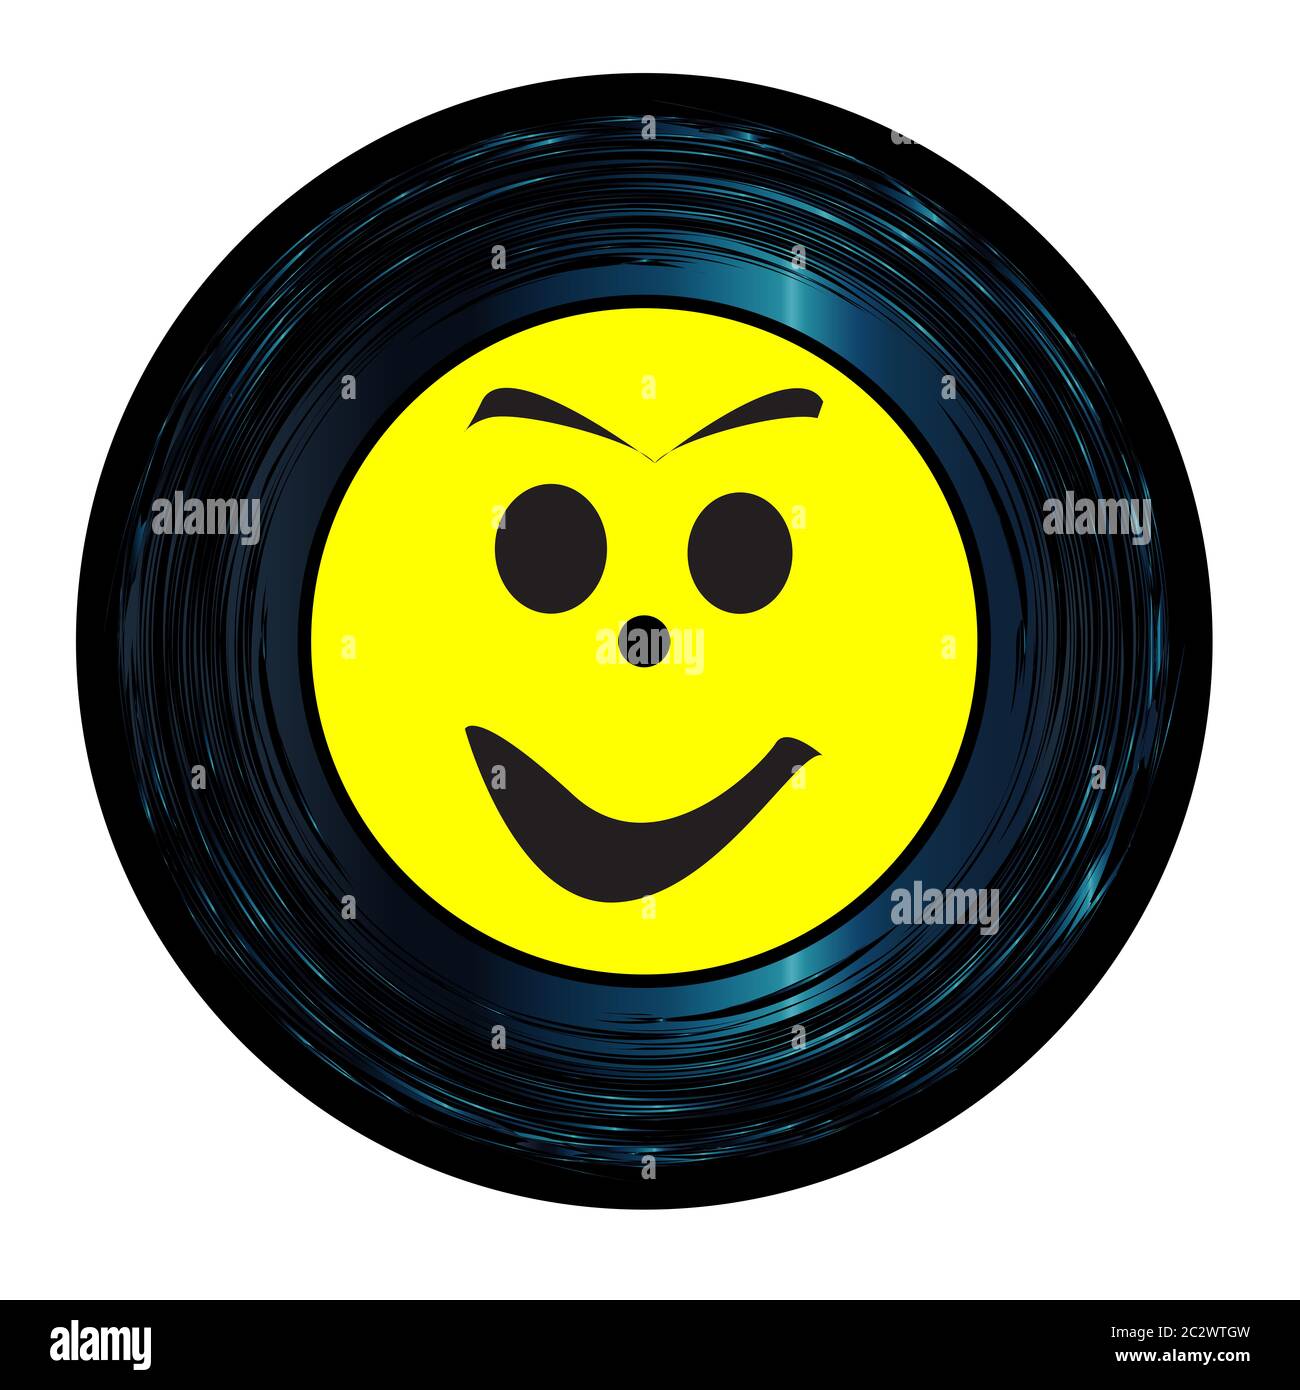 Happy Emoji emoticon face on a 45 Seven Inch Vinyl record with yellow label  over a white background Stock Photo - Alamy